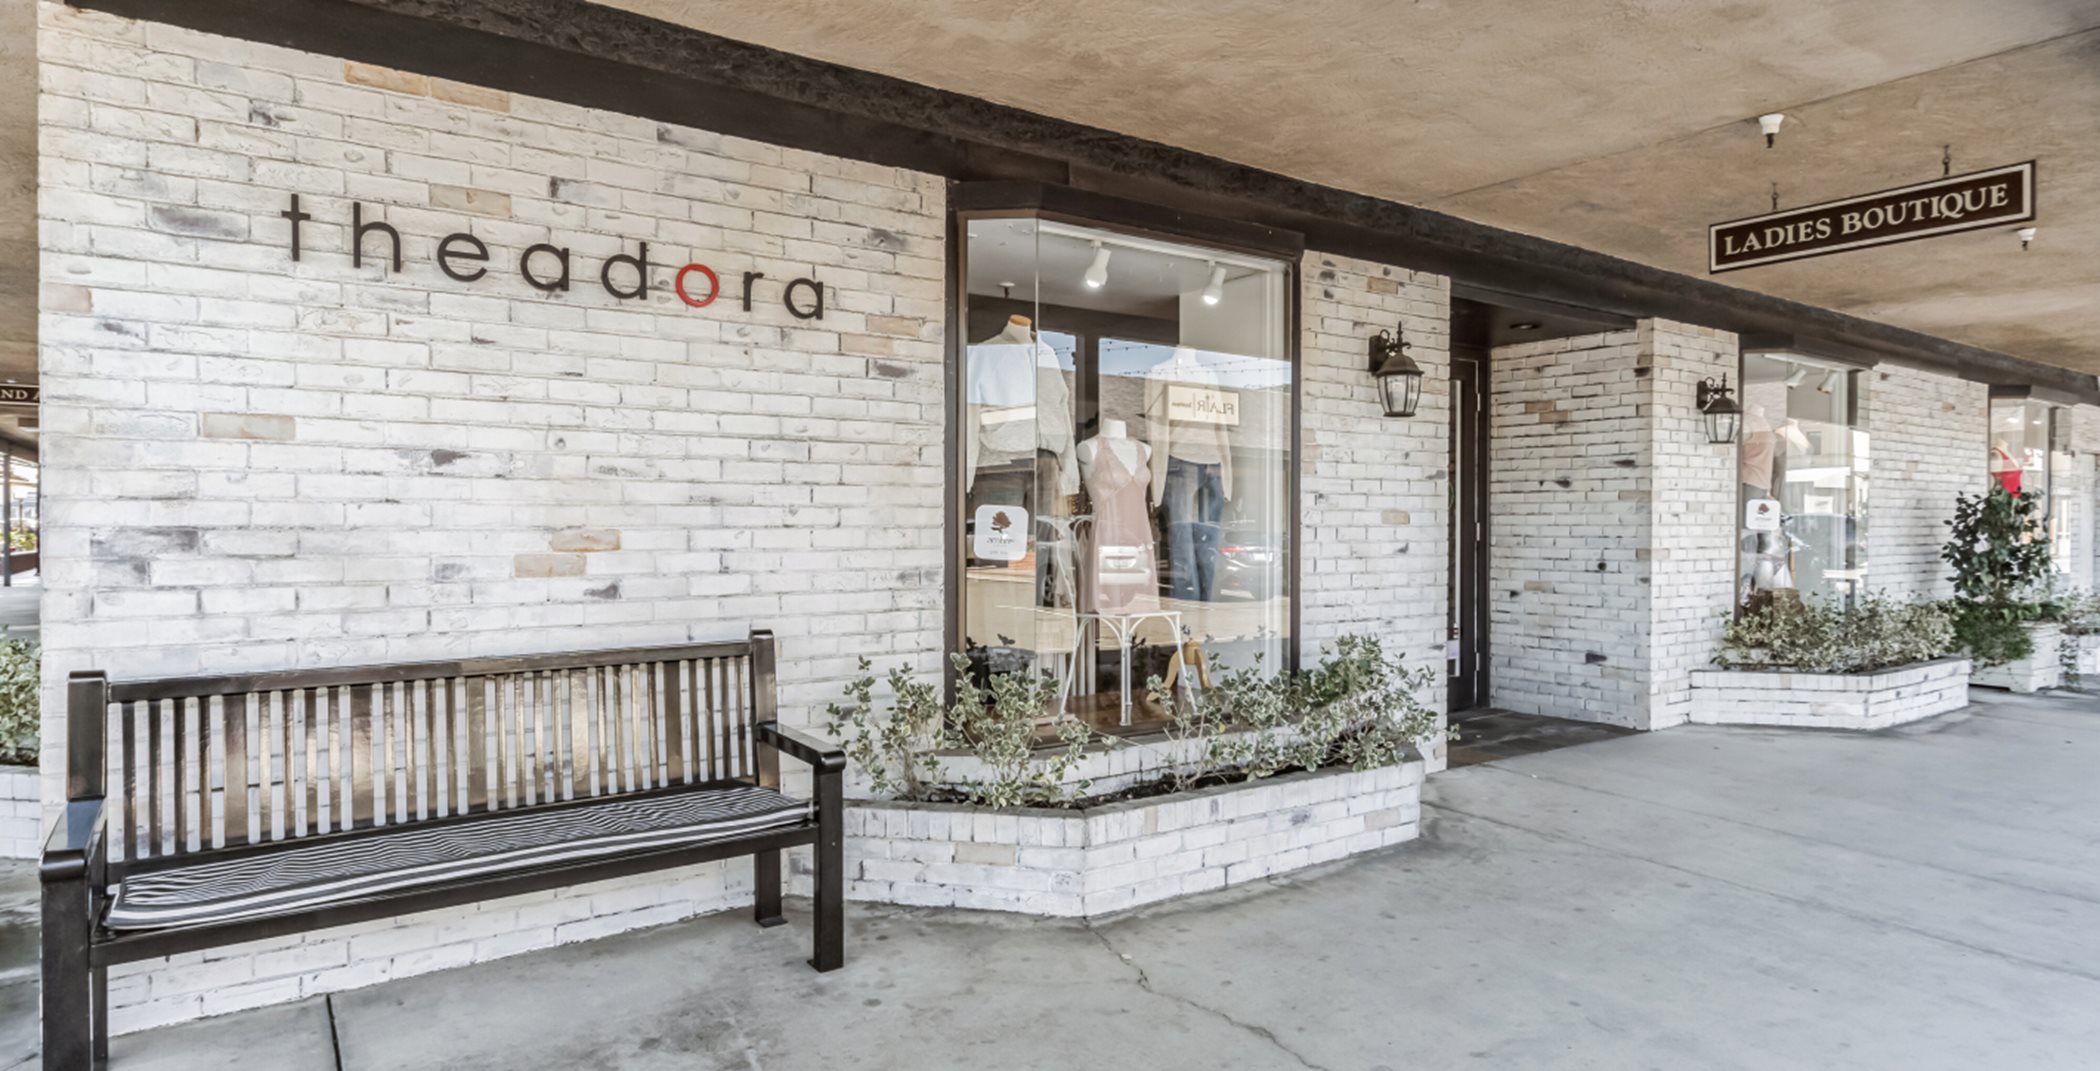 Exterior of the Theodora Boutique storefront. It has white brick and a metal lettering that reads, "theodora."